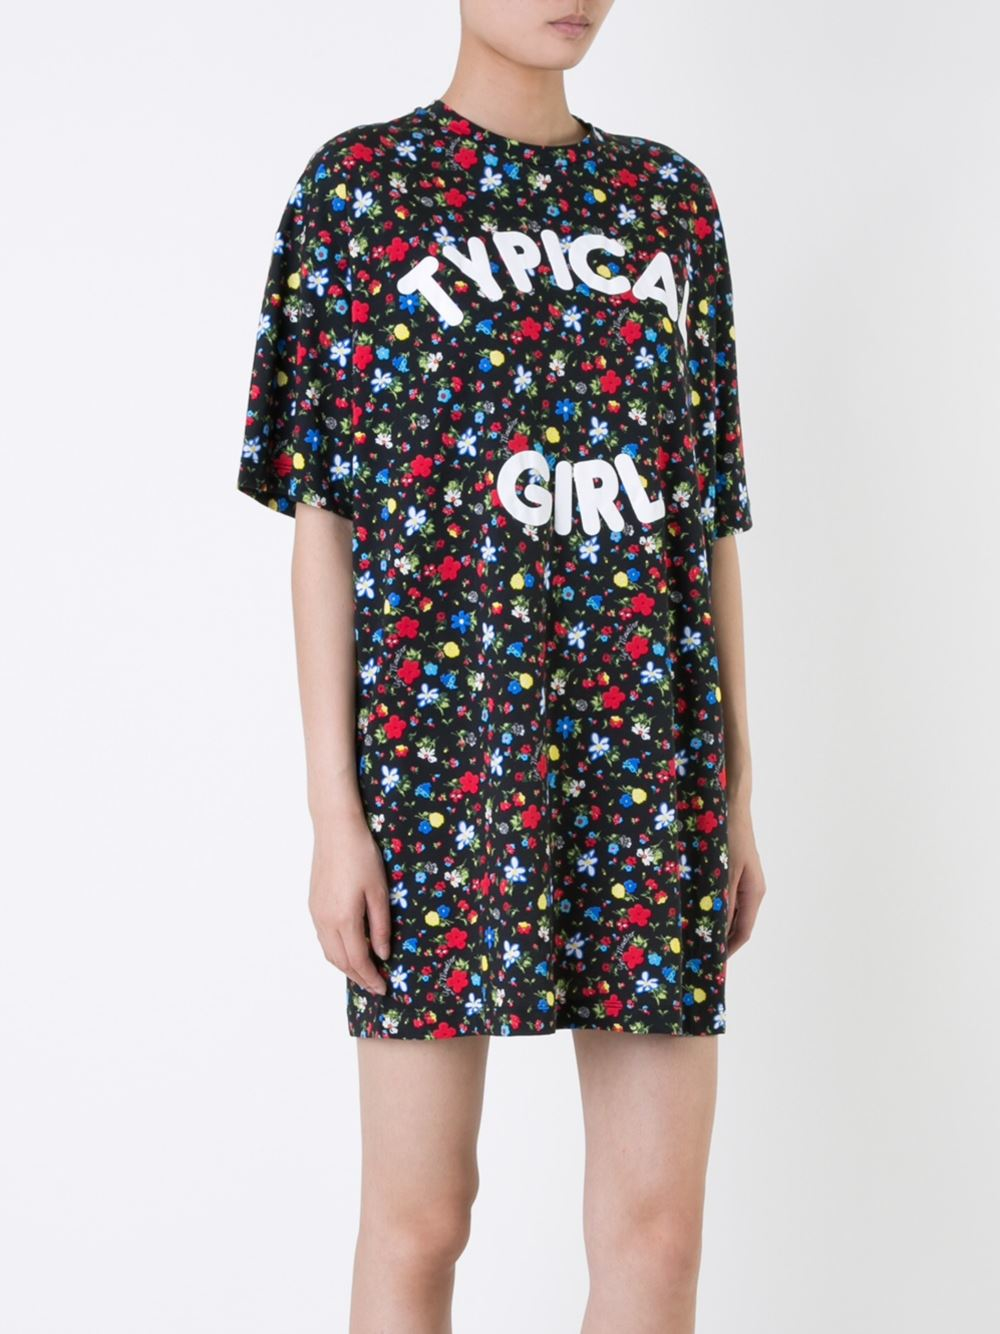 Love Moschino Cotton 'typical Girl' T-shirt Dress in Black - Lyst